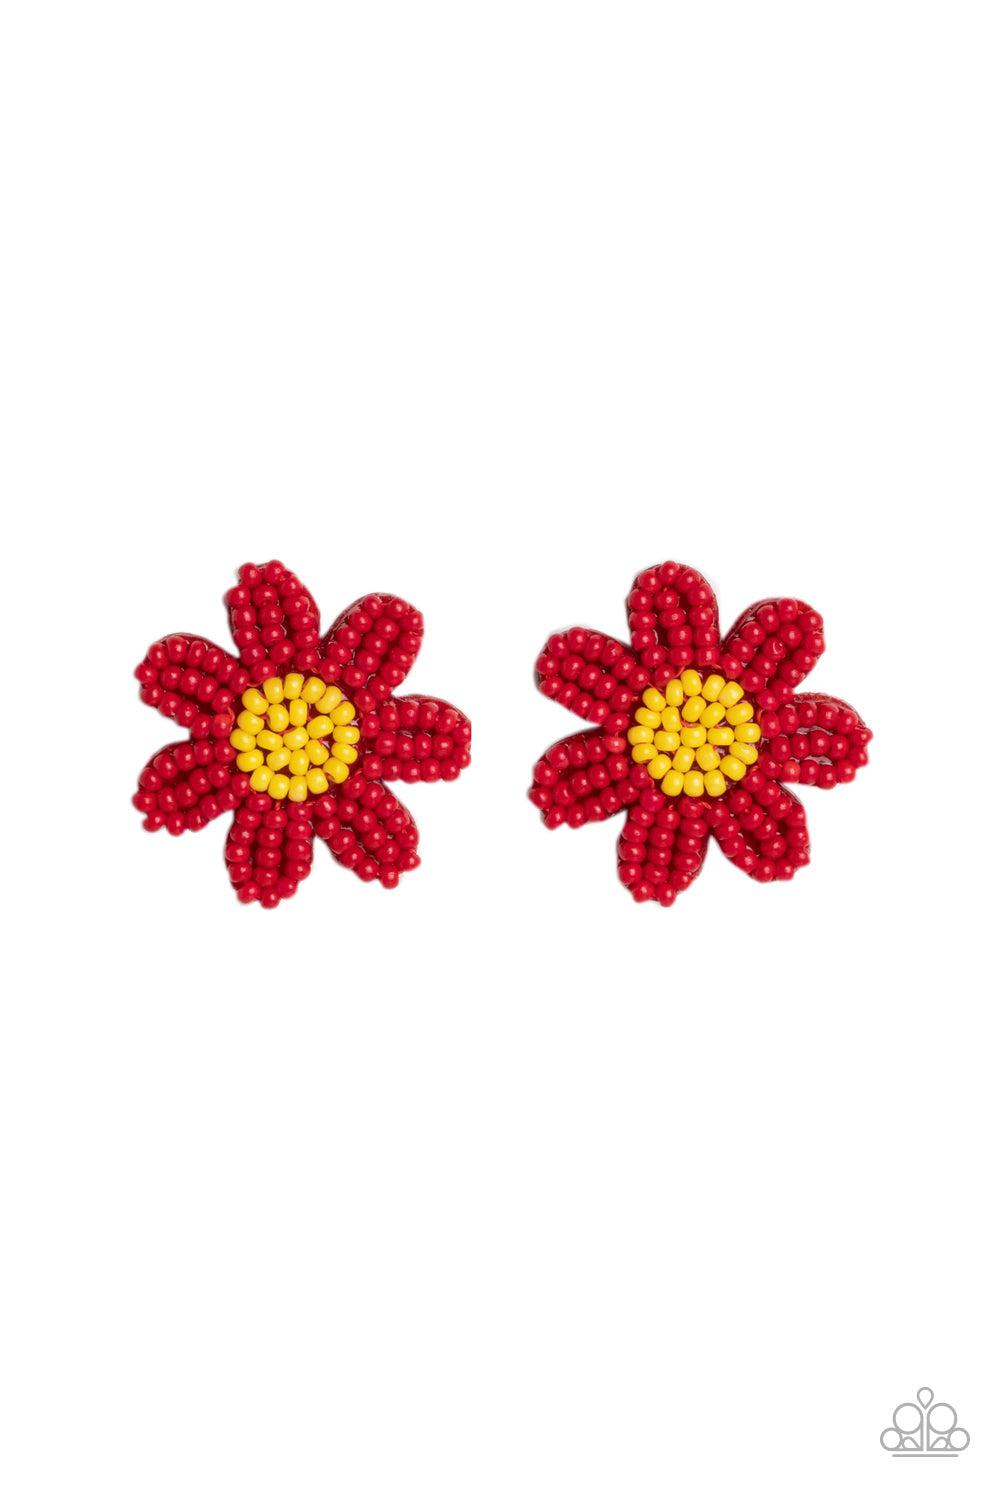 Sensational Seeds Red Daisy Seed Bead Earrings - Paparazzi Accessories- lightbox - CarasShop.com - $5 Jewelry by Cara Jewels